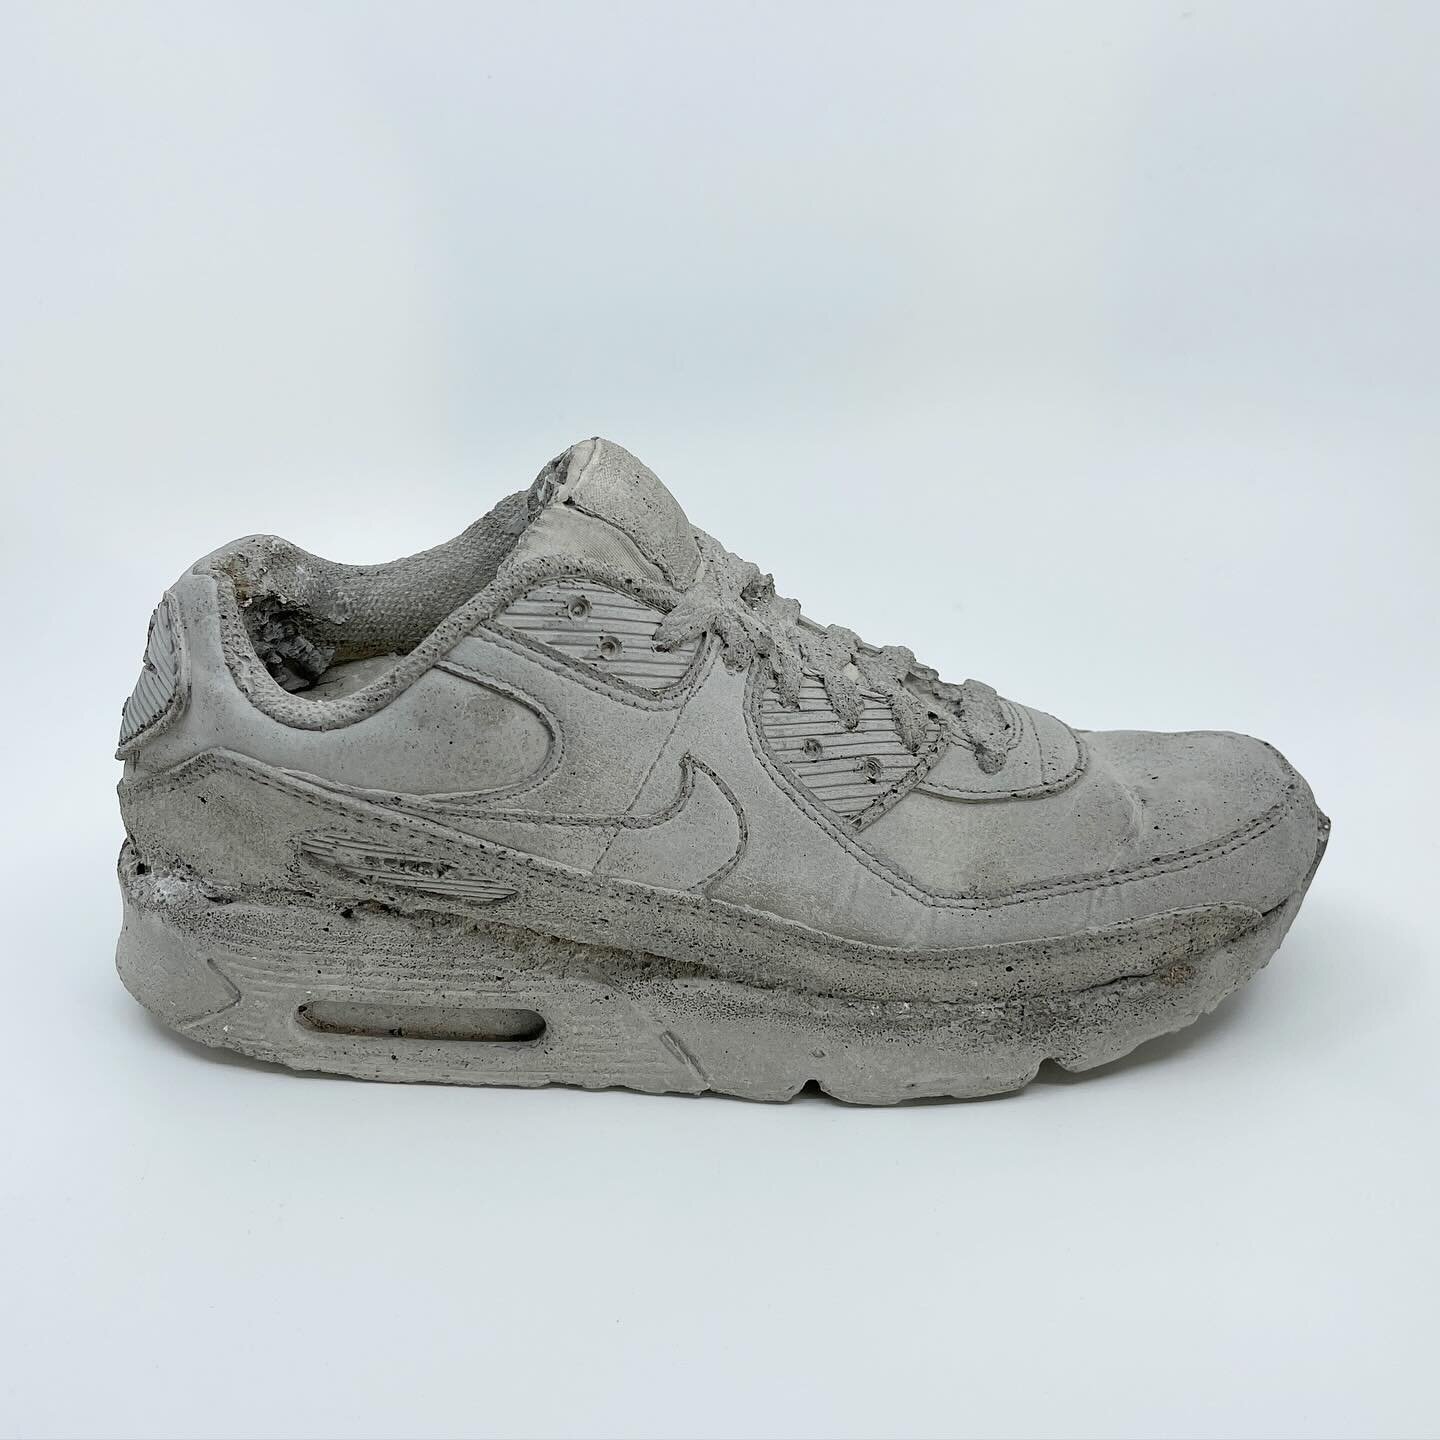 Available as part of @artistsupportpledge 
Pre-order yours now for Christmas at a special low price till 2024.

Nike Air Max trainer Relic
Concrete
27cm x 10cm x 13cm
&pound;160 + P&amp;P (includes pillar candle)

#artistsupportpledge #relic #nike #a